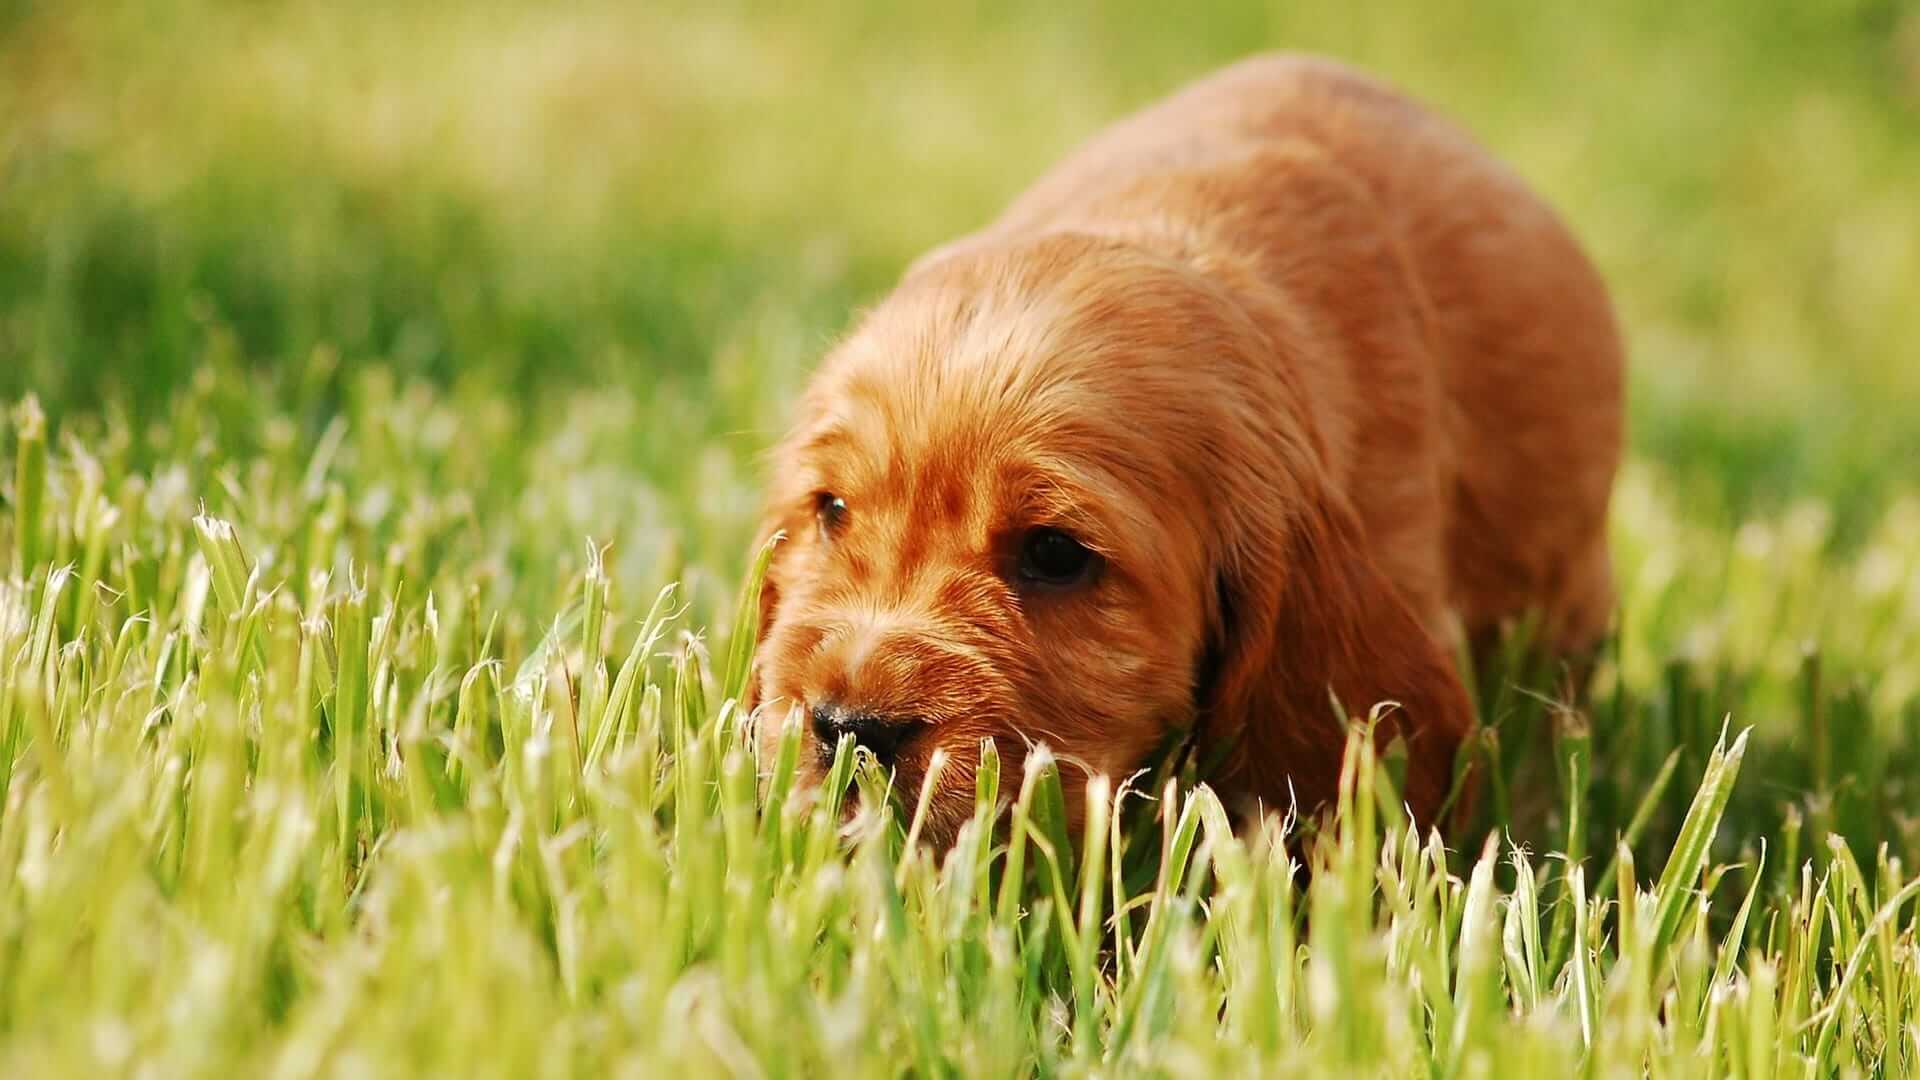 why do dogs eat grass to make themselves sick